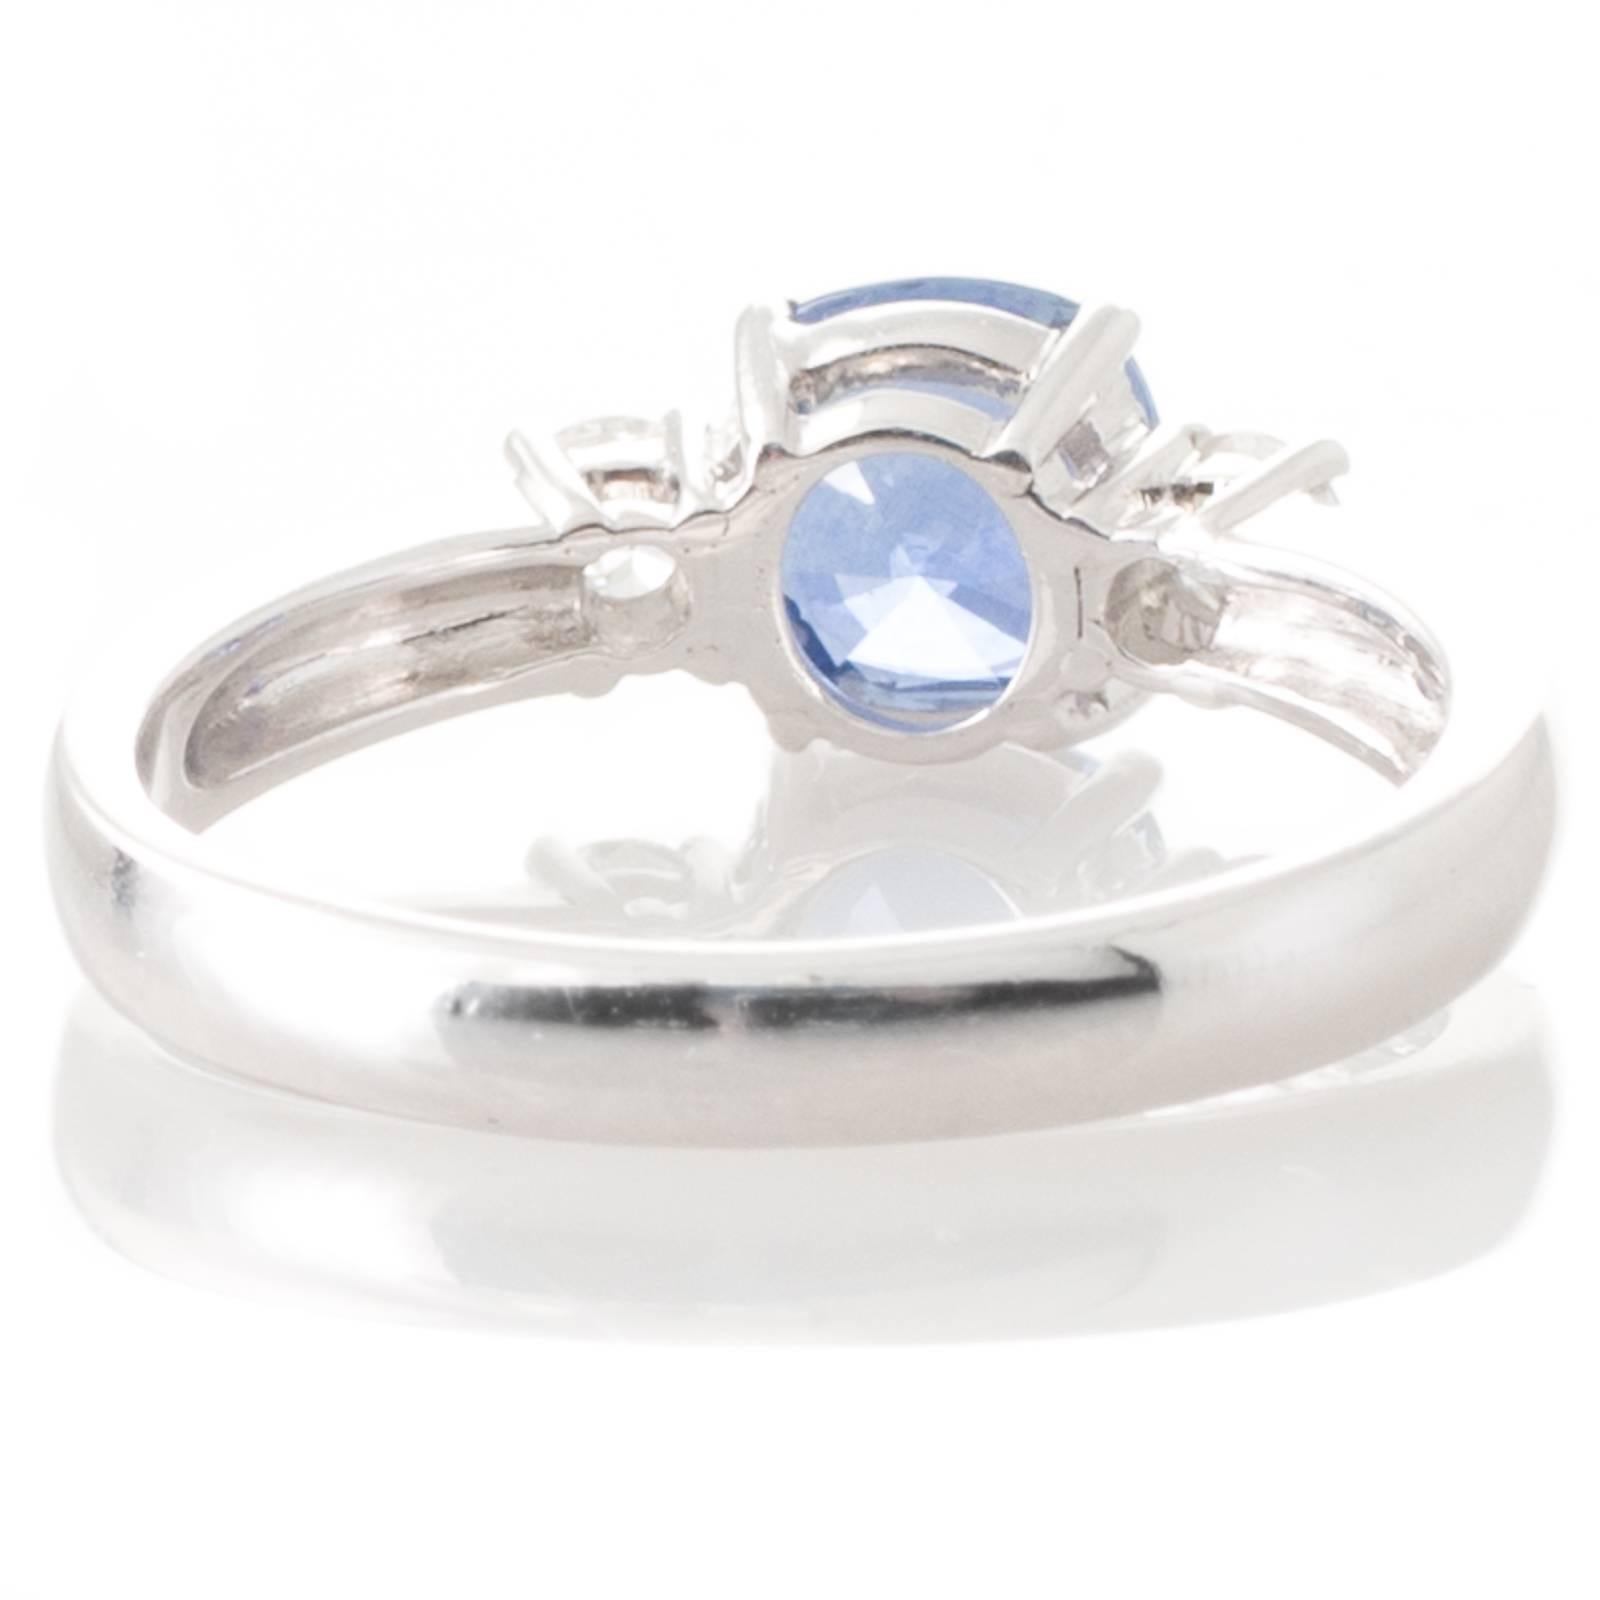 An 18ct white gold ring featuring a cushion cut sapphire weighing 1.31ct, four claw set between two round brilliant cut diamonds also claw set to upswept shoulders and a plain polished band. Total Sapphire Weight: 1.31ct Total Diamond Weight: 0.24ct